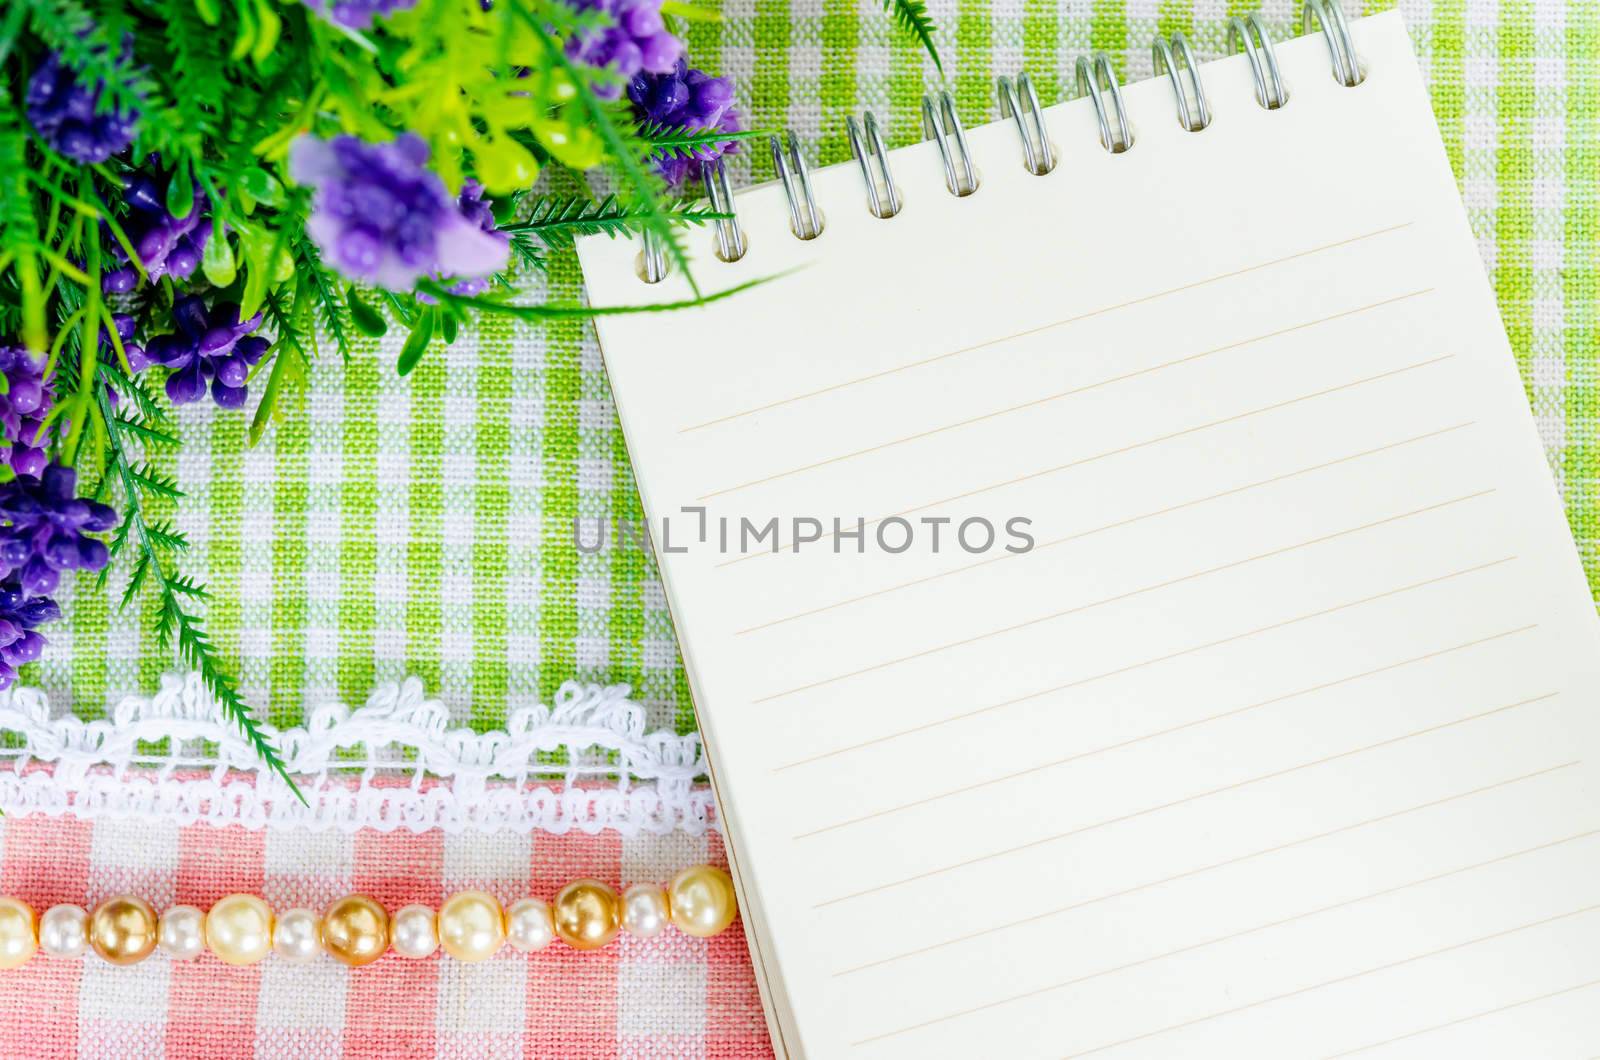 Open diary and violet flower on beautiful background from tob view. Fre space for your text.